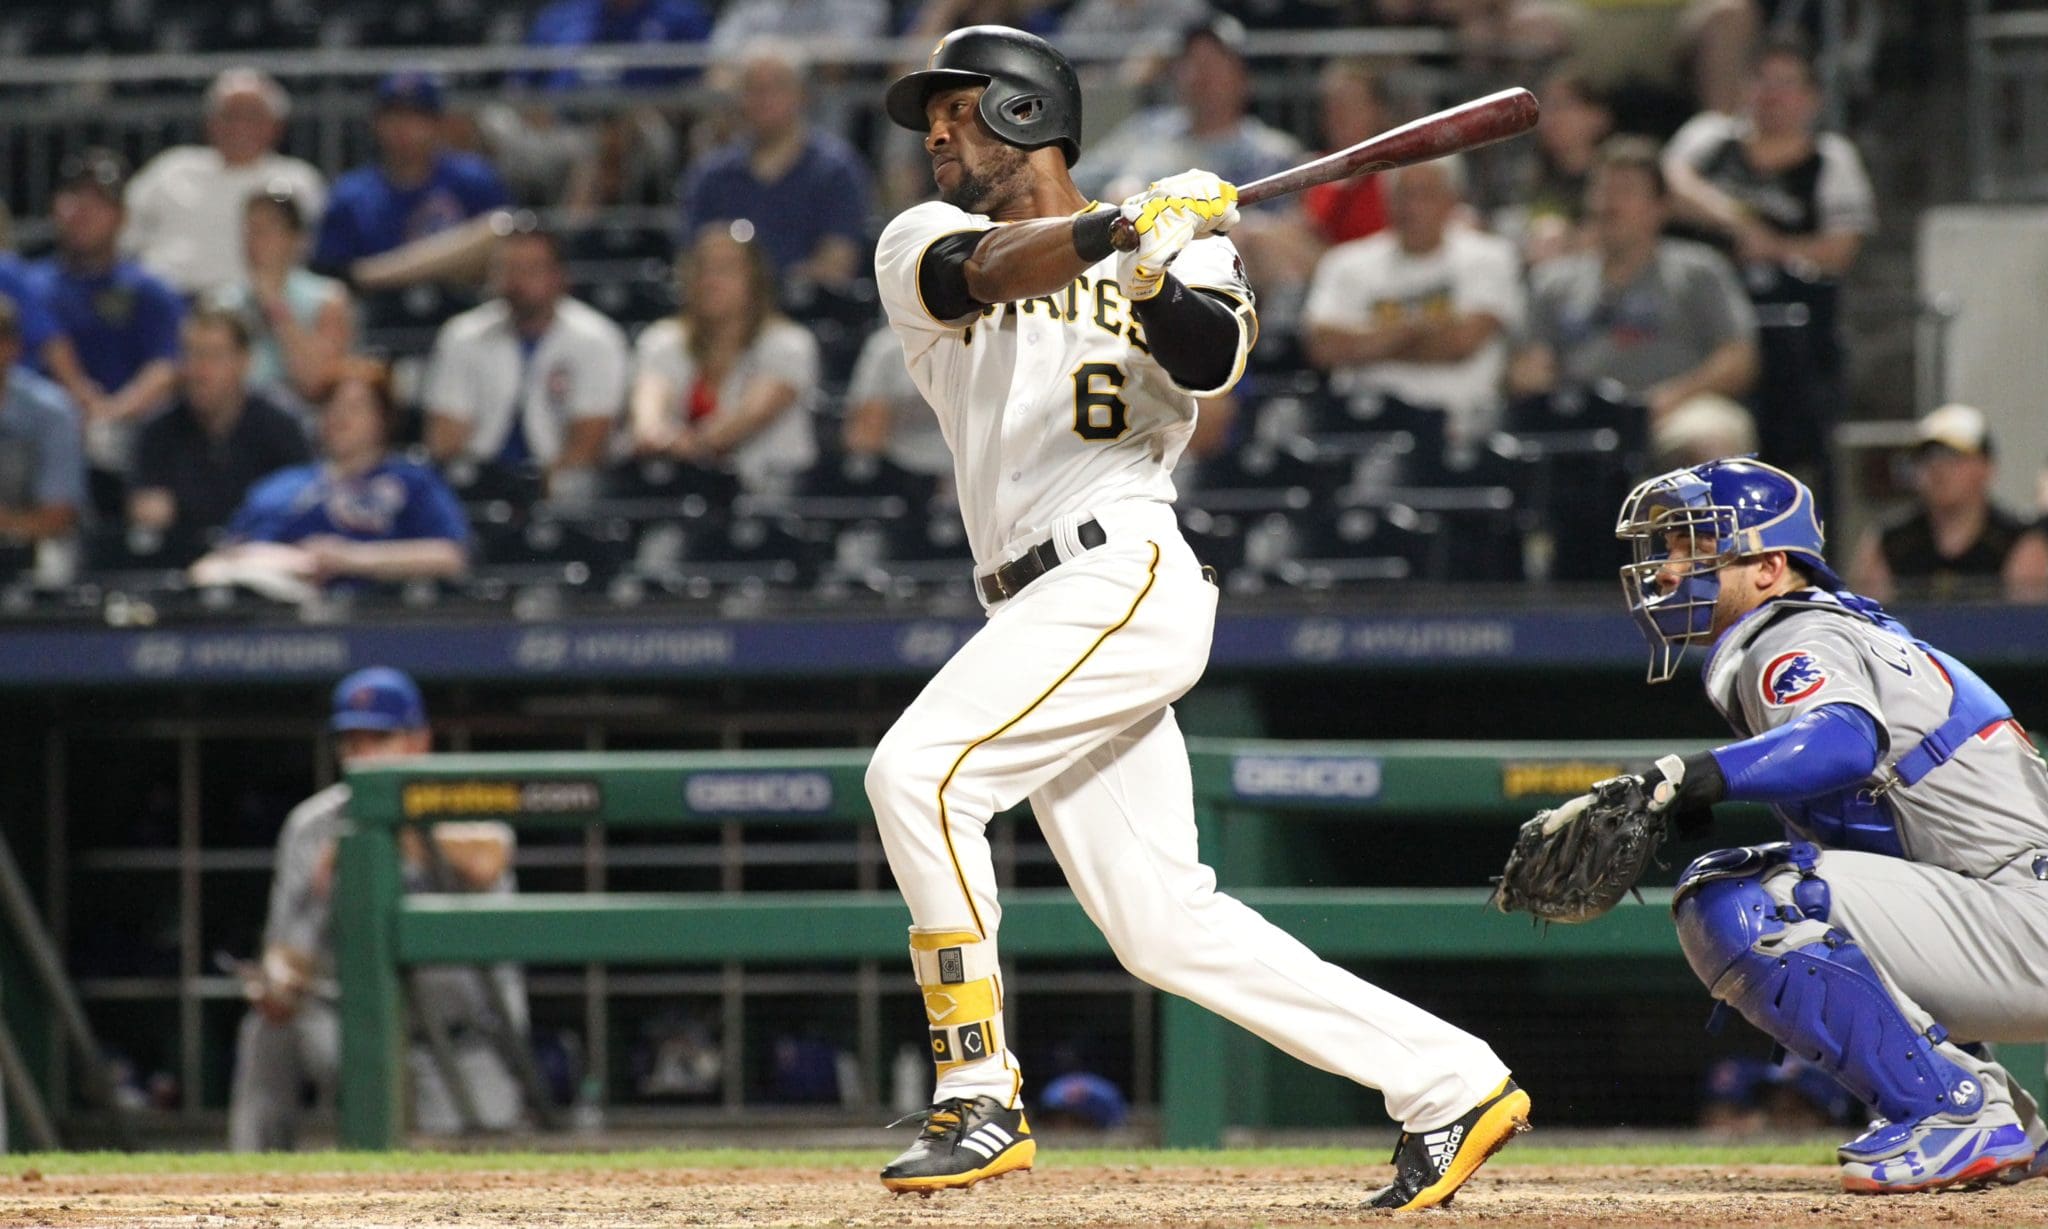 May 29, 2016: Pittsburgh Pirates left fielder Starling Marte #6